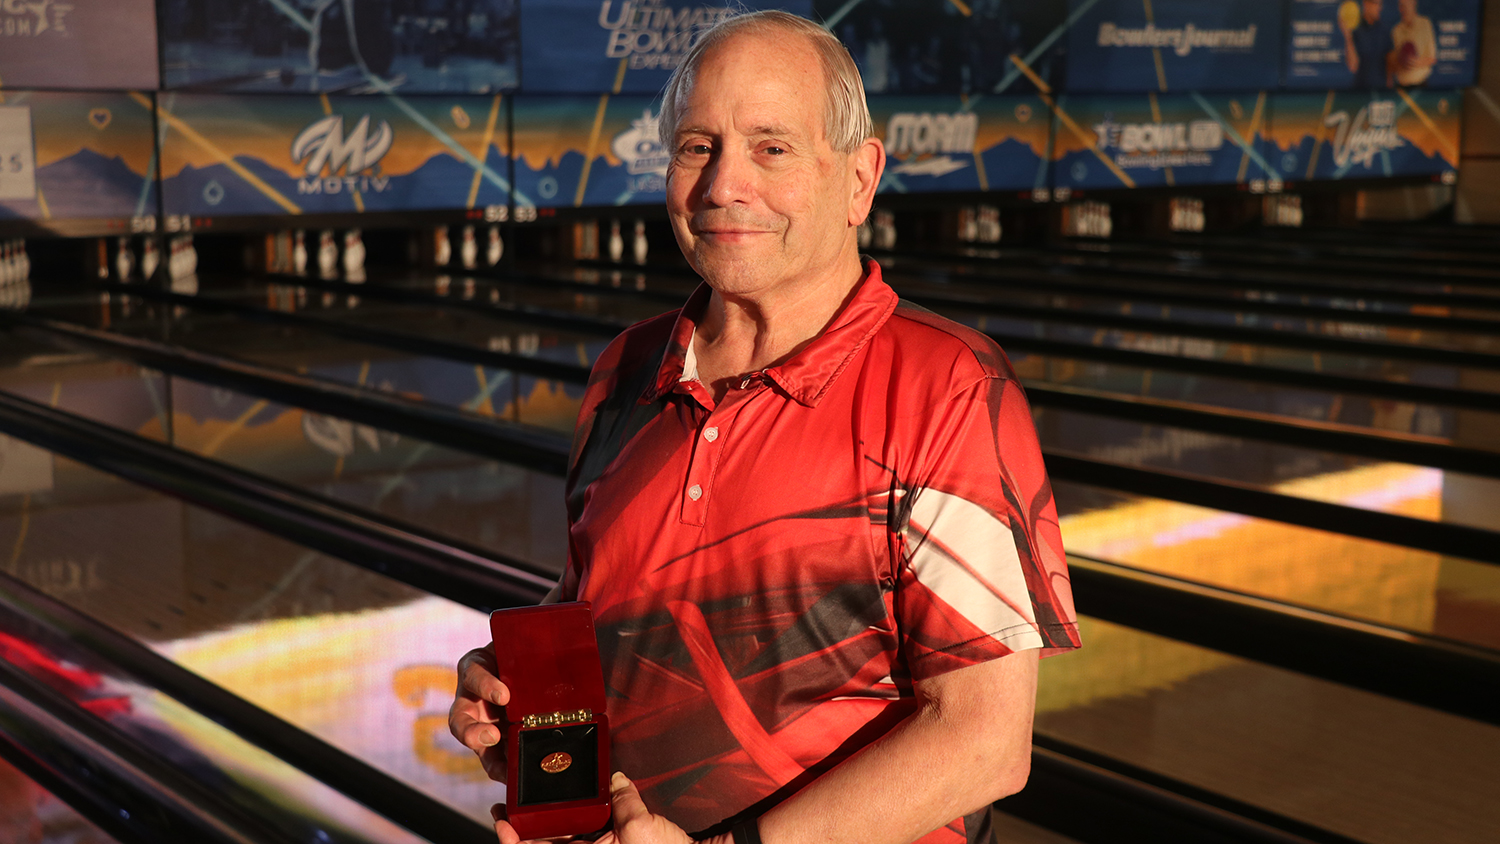 Gerard Ehret celebrates 50 years at the USBC Open Championships